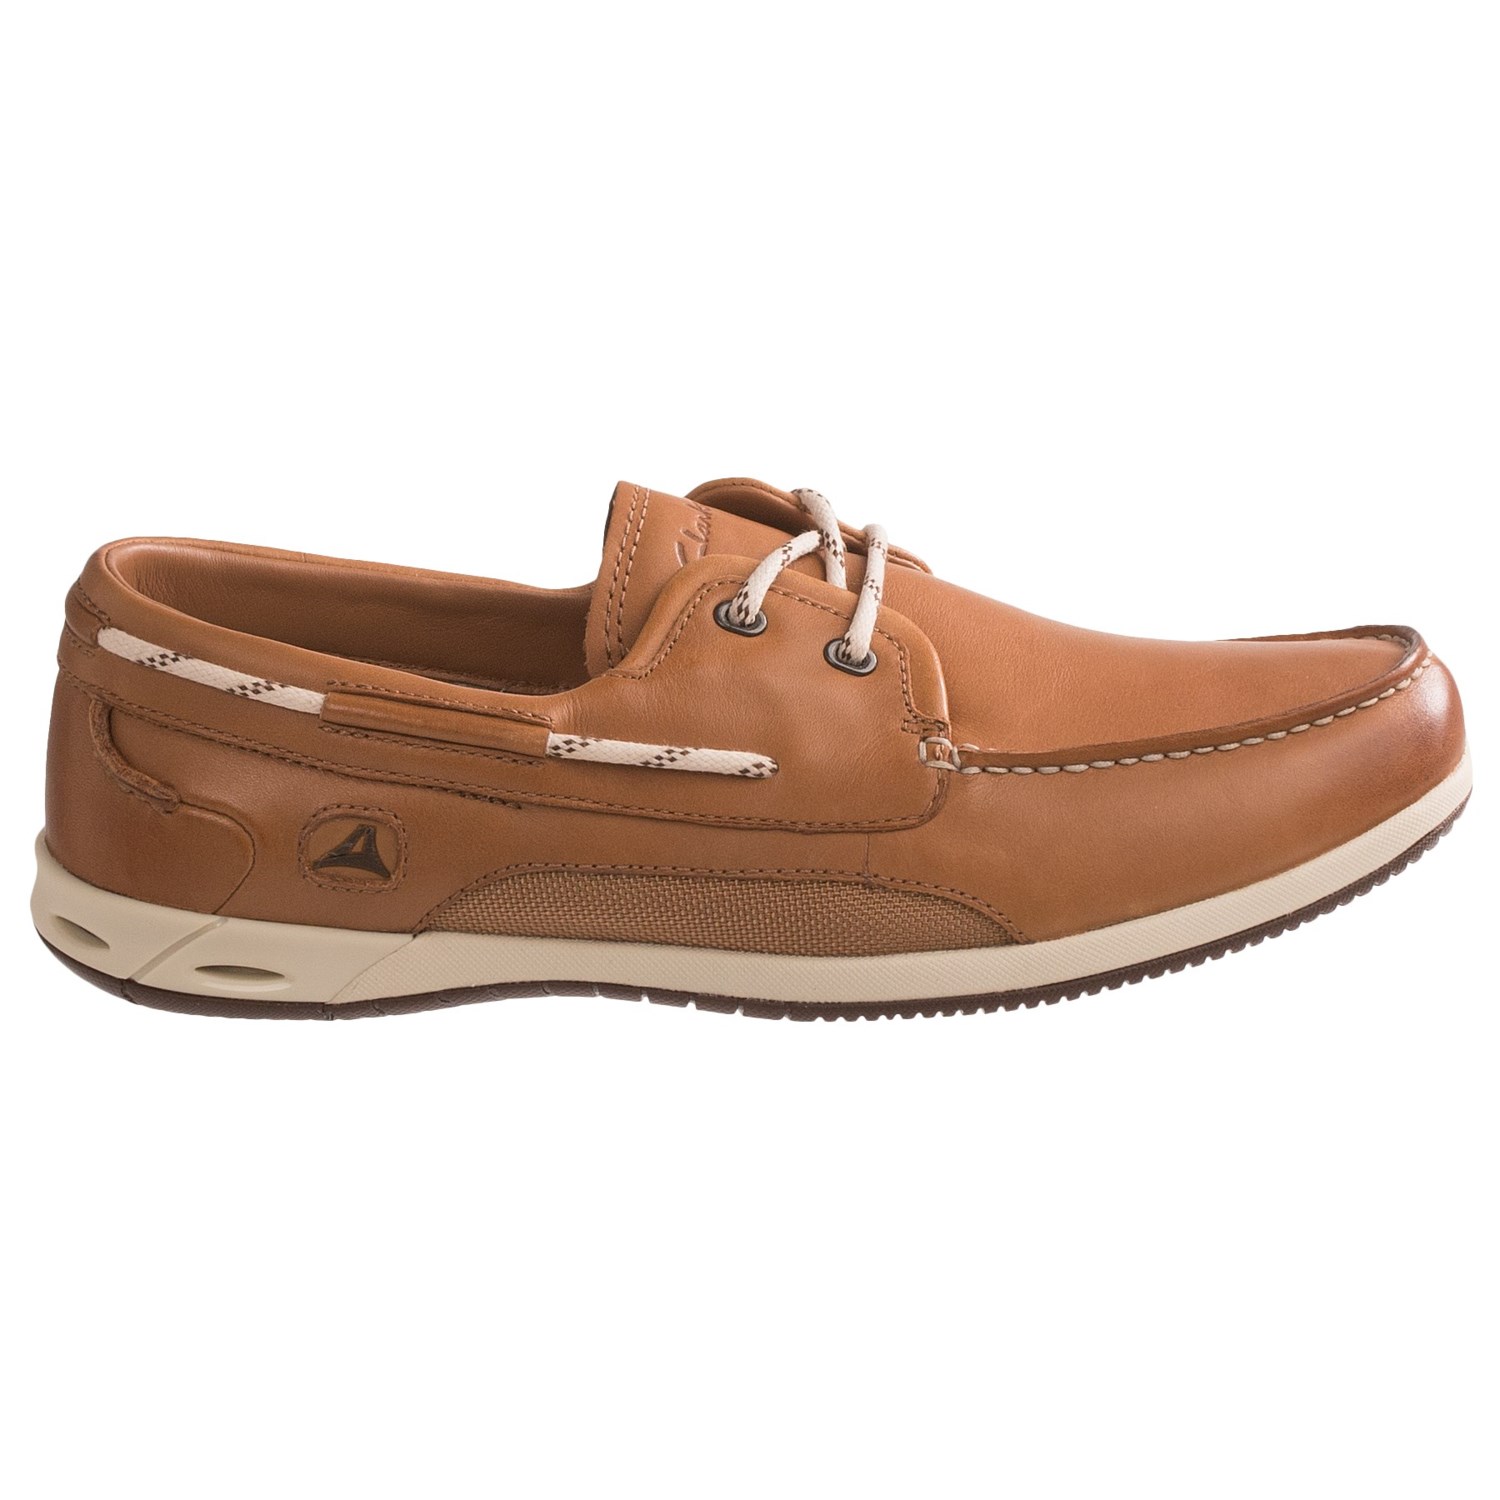 clarks shoes at tanger outlet